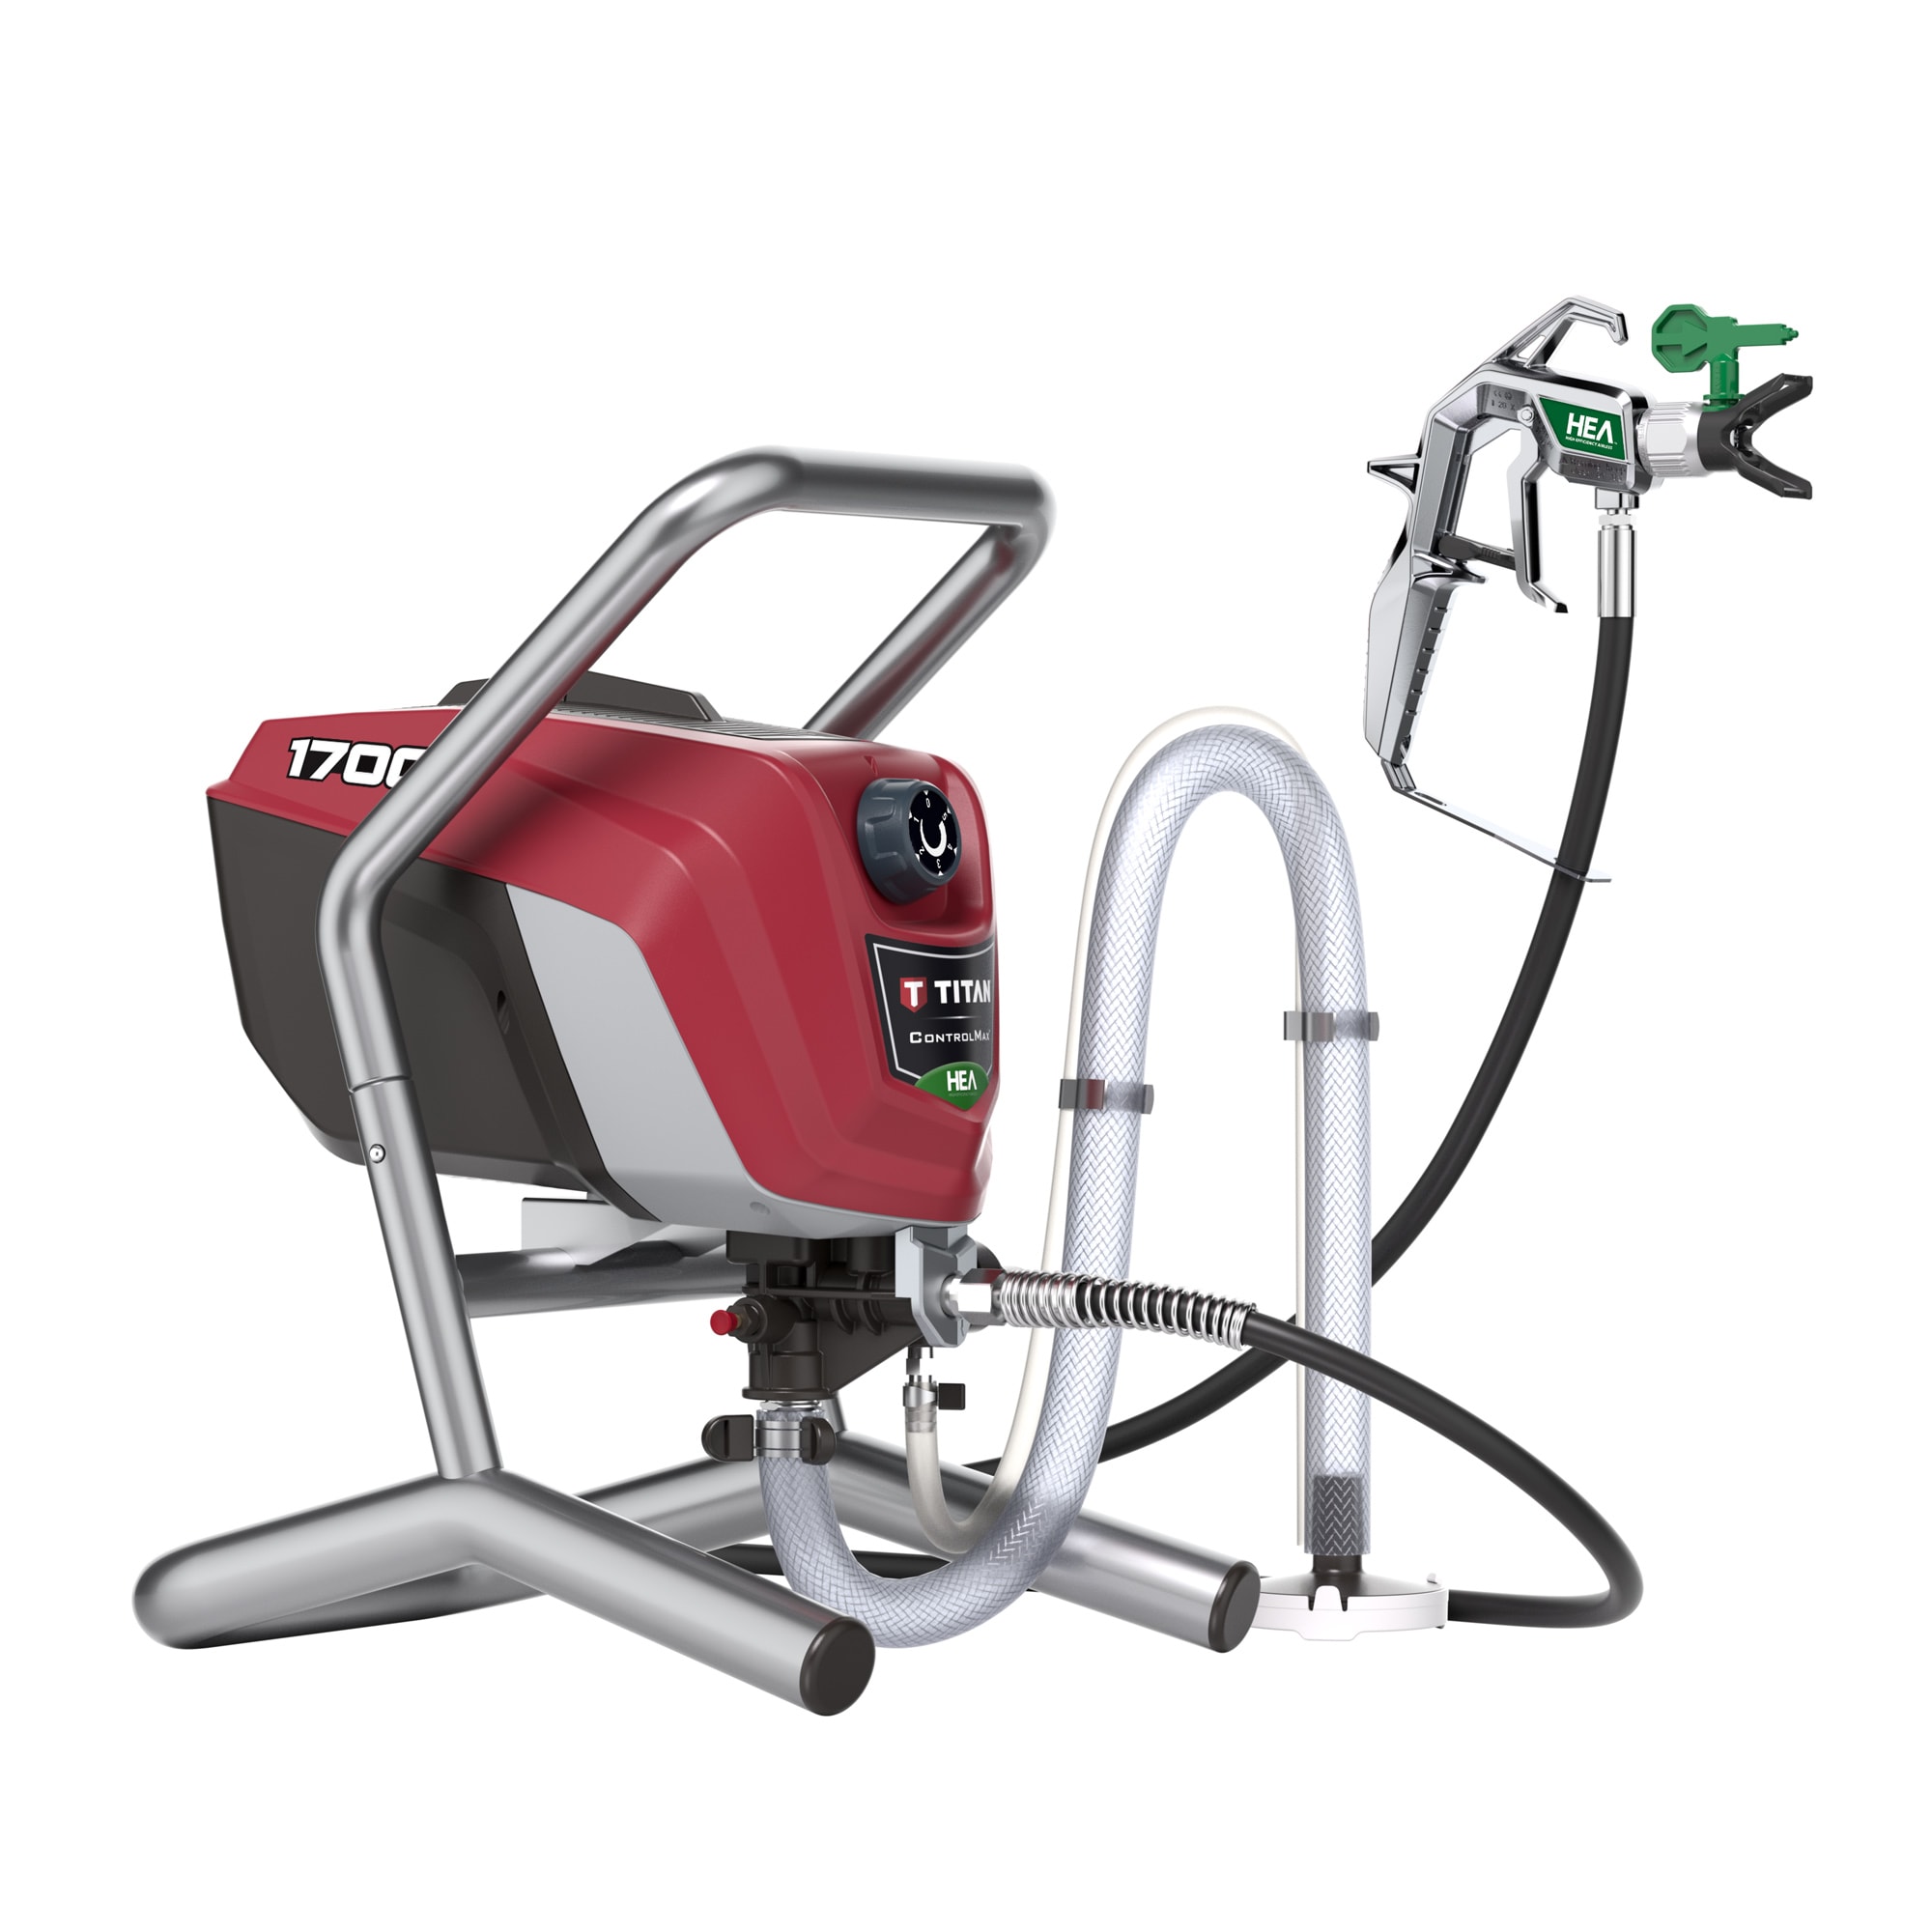 D500SR  Making Quality Spray Paint Equipment in the US Since 1904